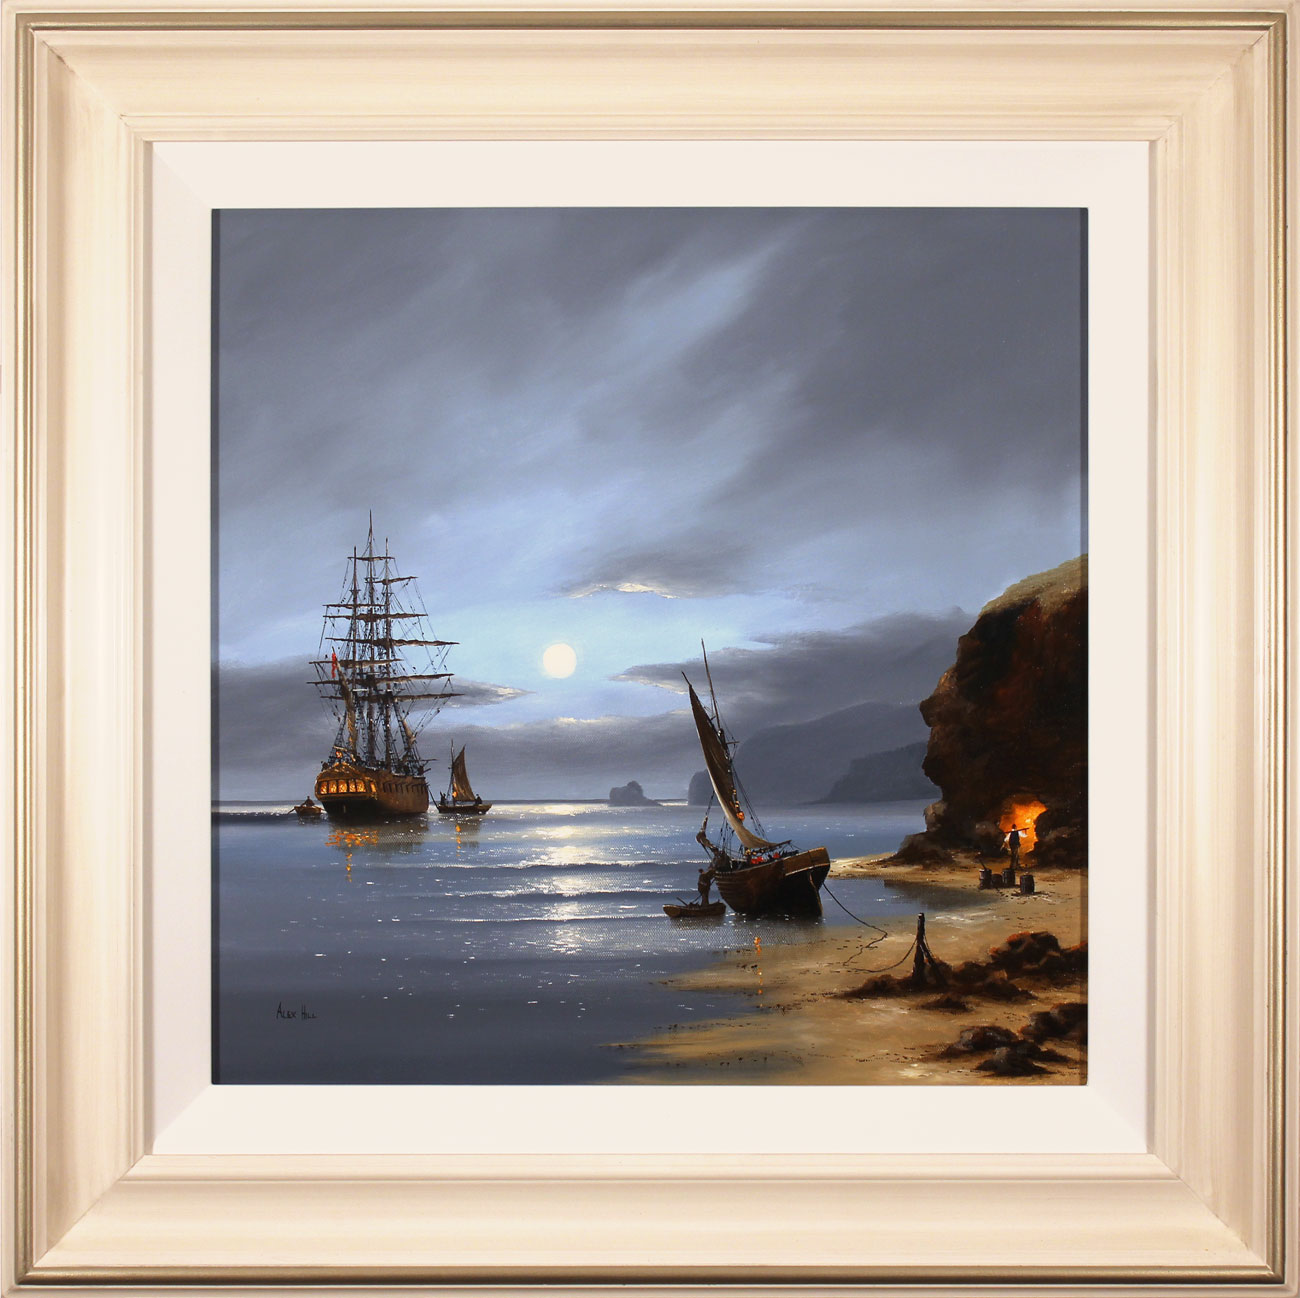 Alex Hill, Original oil painting on canvas, Smuggler's Cove, click to enlarge